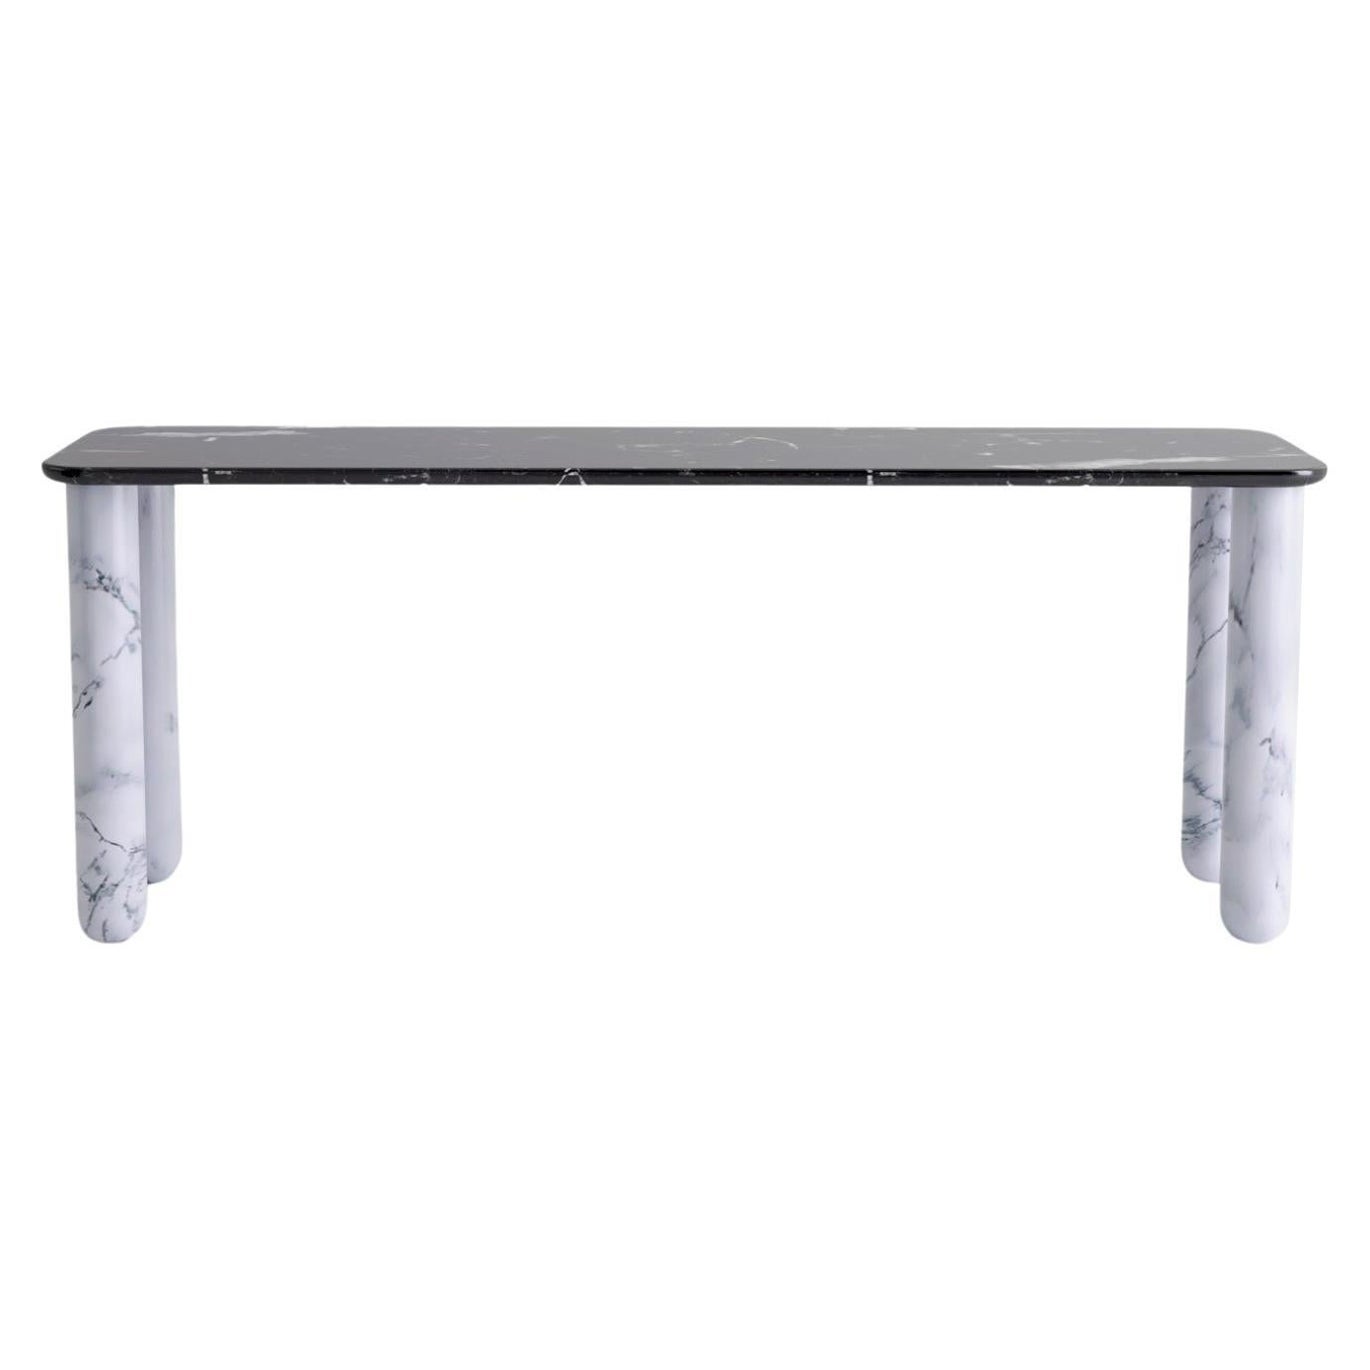 Large Black and White Marble "Sunday" Dining Table, Jean-Baptiste Souletie